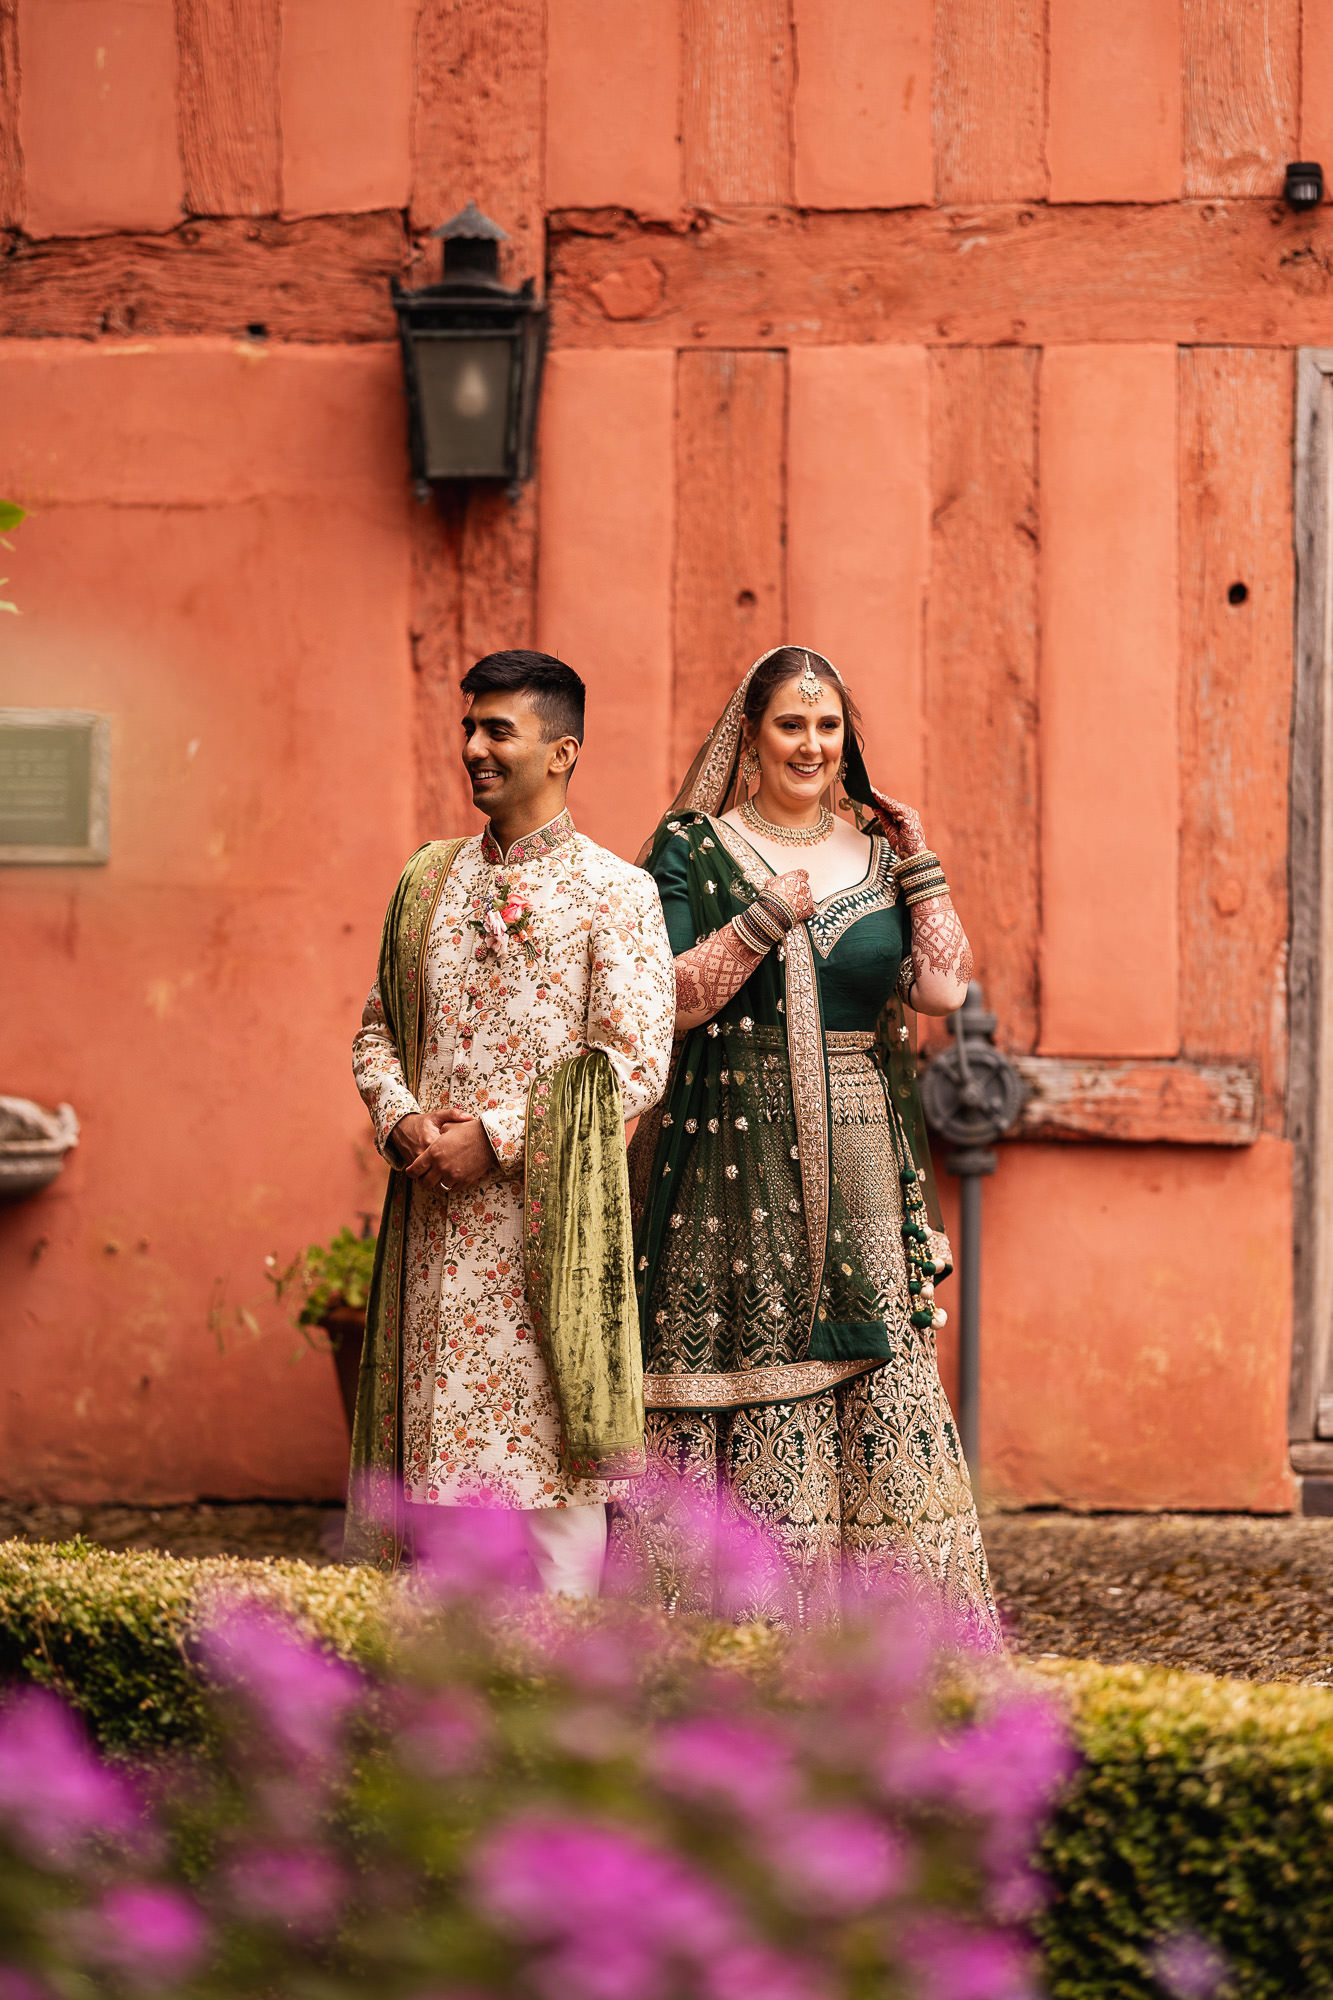 Multicultural Wedding, Jewish Wedding, Pauntley Court, Gloucestershire, Couples portraits